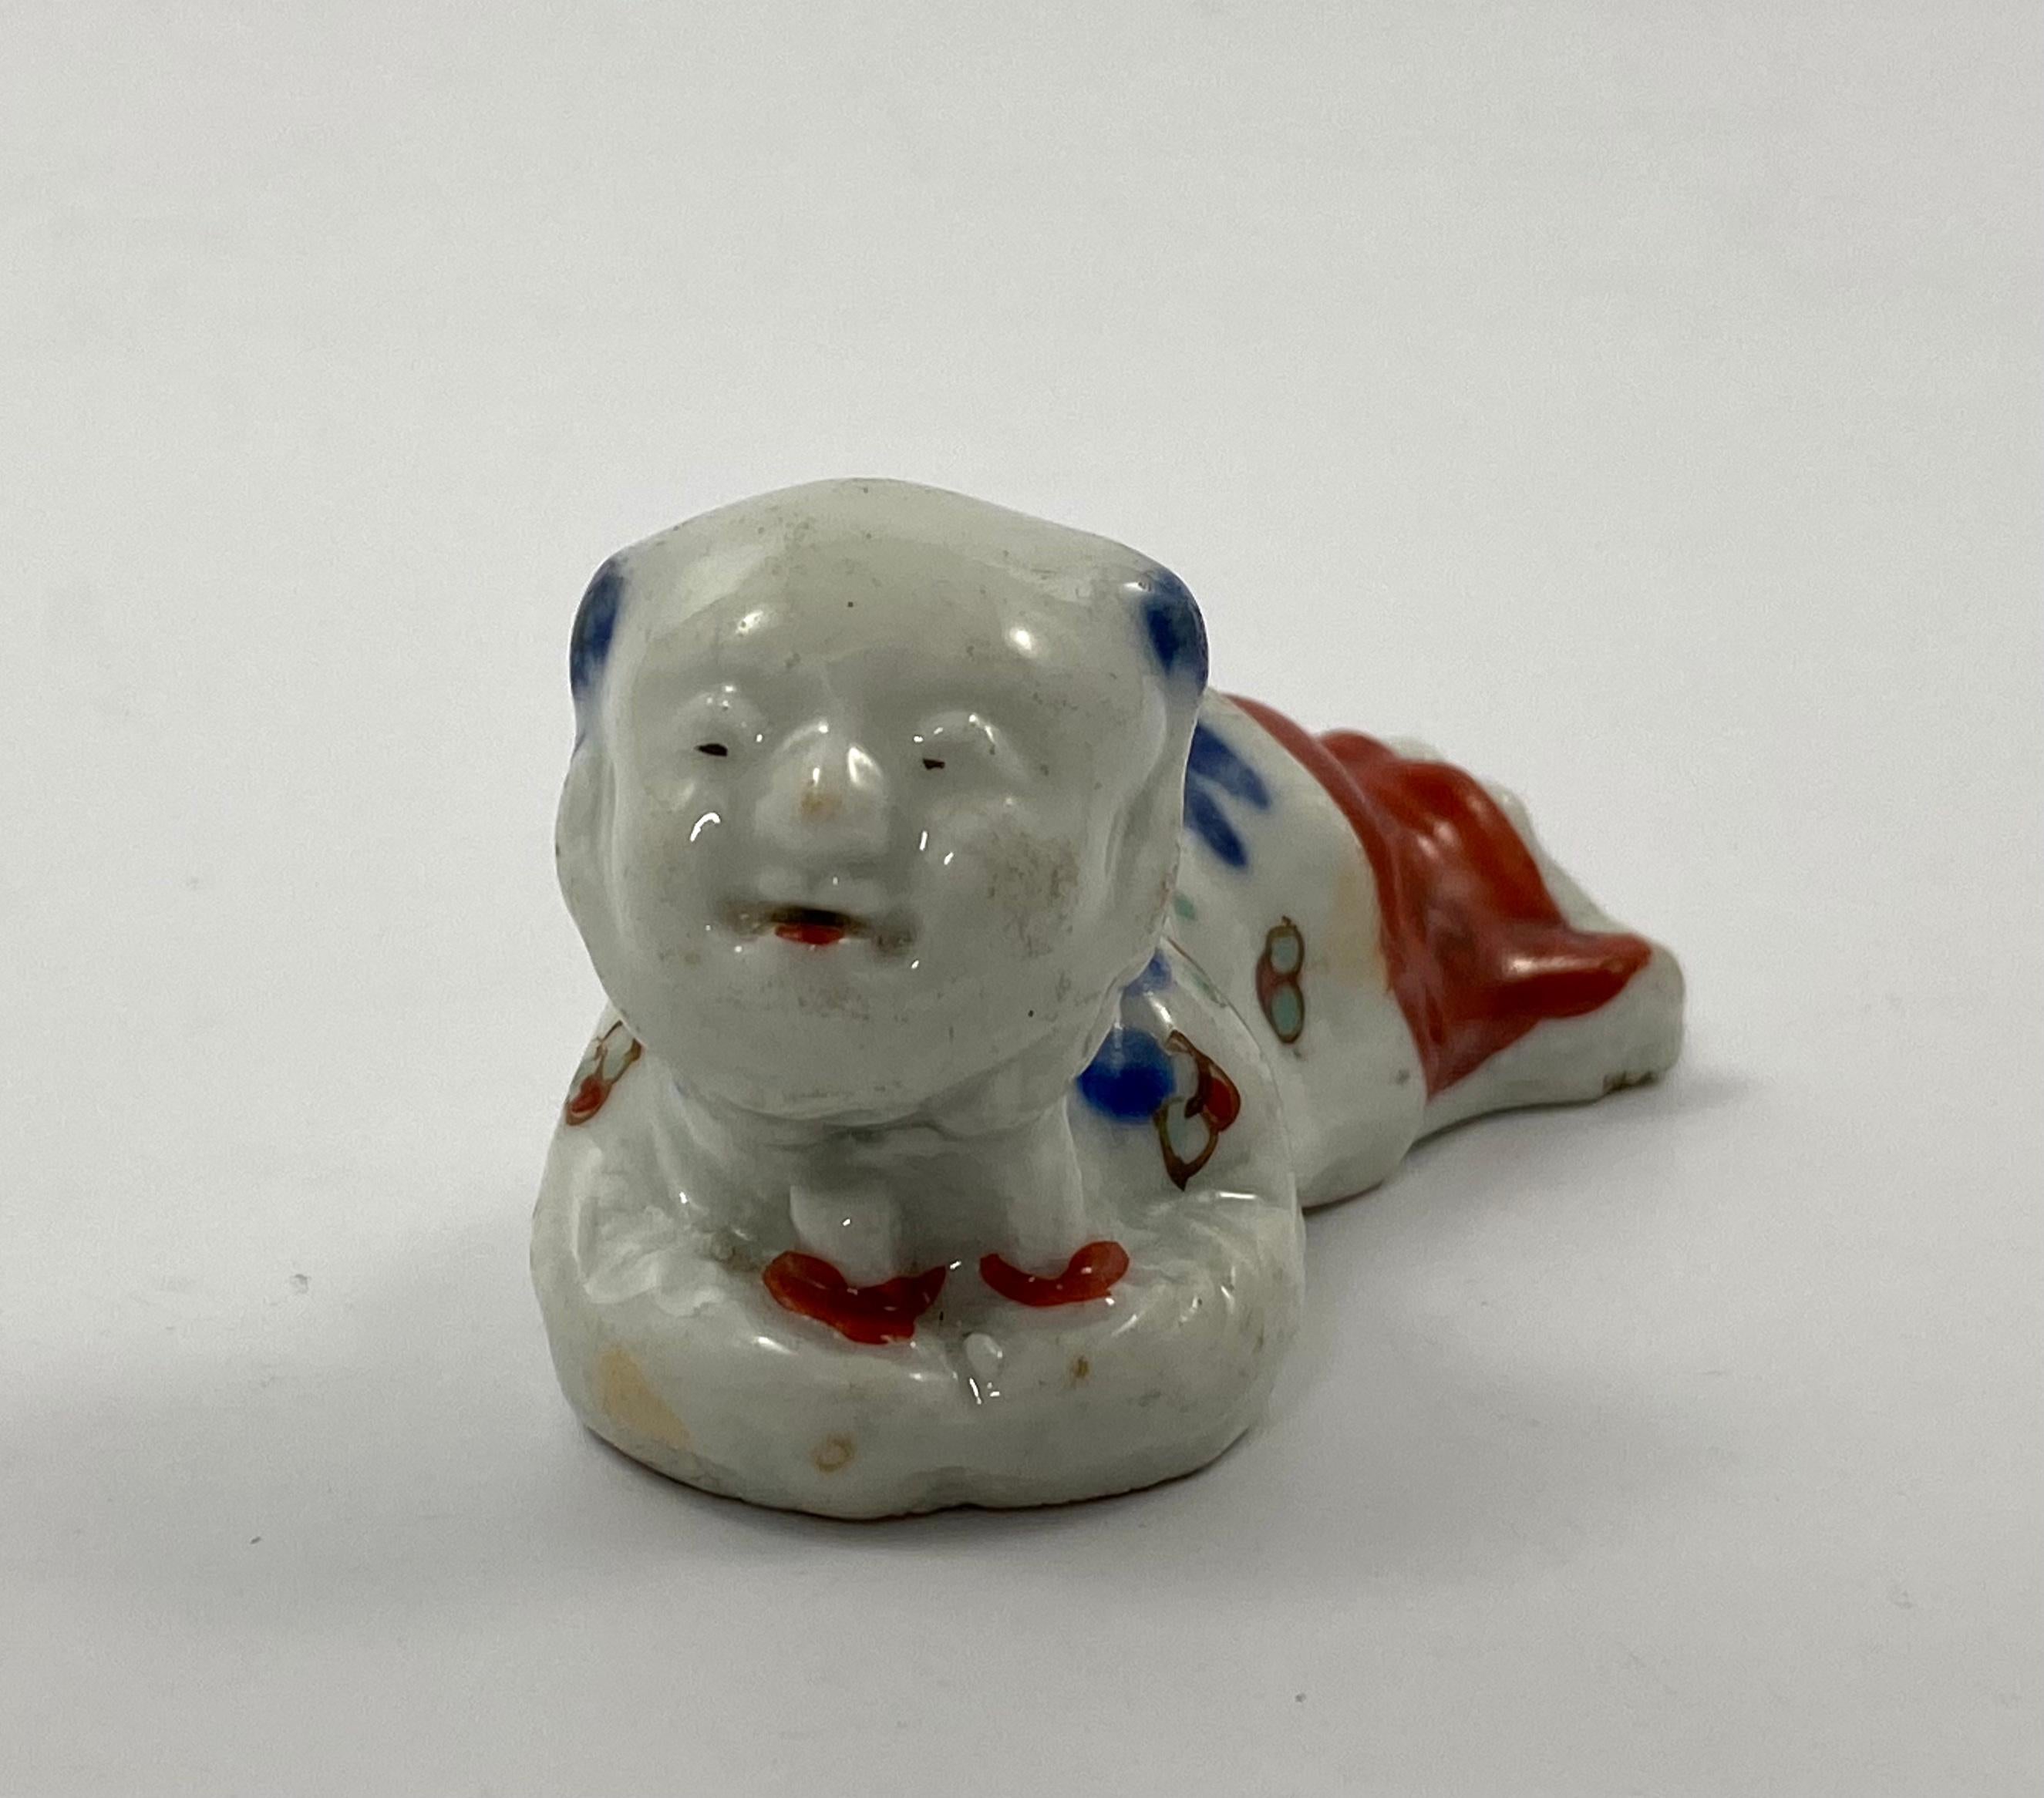 Rare Arita porcelain bird whistle, Japan, c. 1690, Edo Period. Taking the form of a reclining boy, resting his head in his hands. His tunic enamelled in Imari style, with flowers.
The whistle is blown through a slot in his feet, with the sound